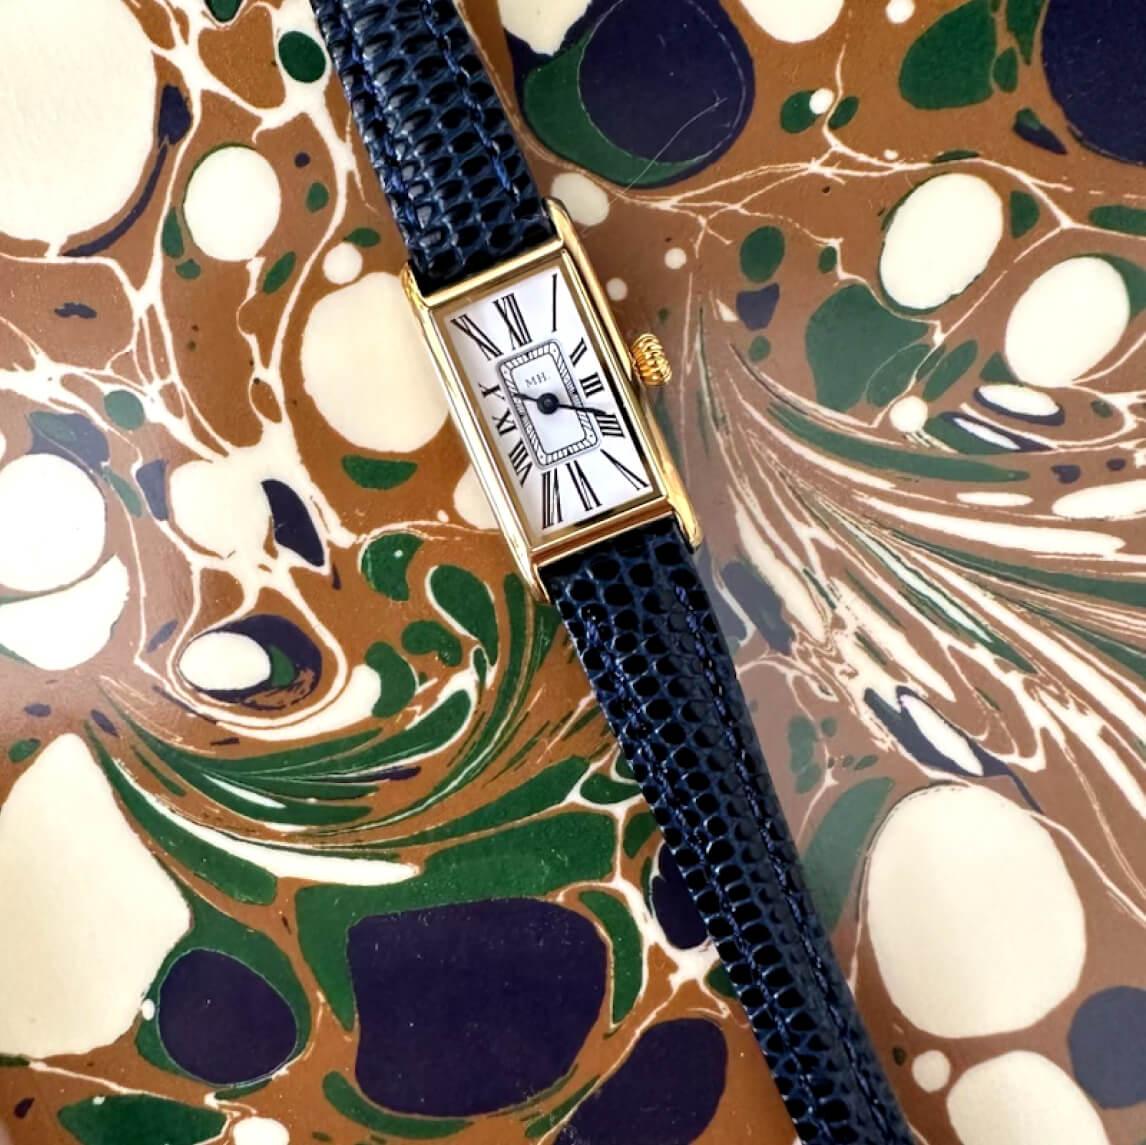 Kimsey Watch Strap: Navy Lizard-Embossed Leather with gold hardware